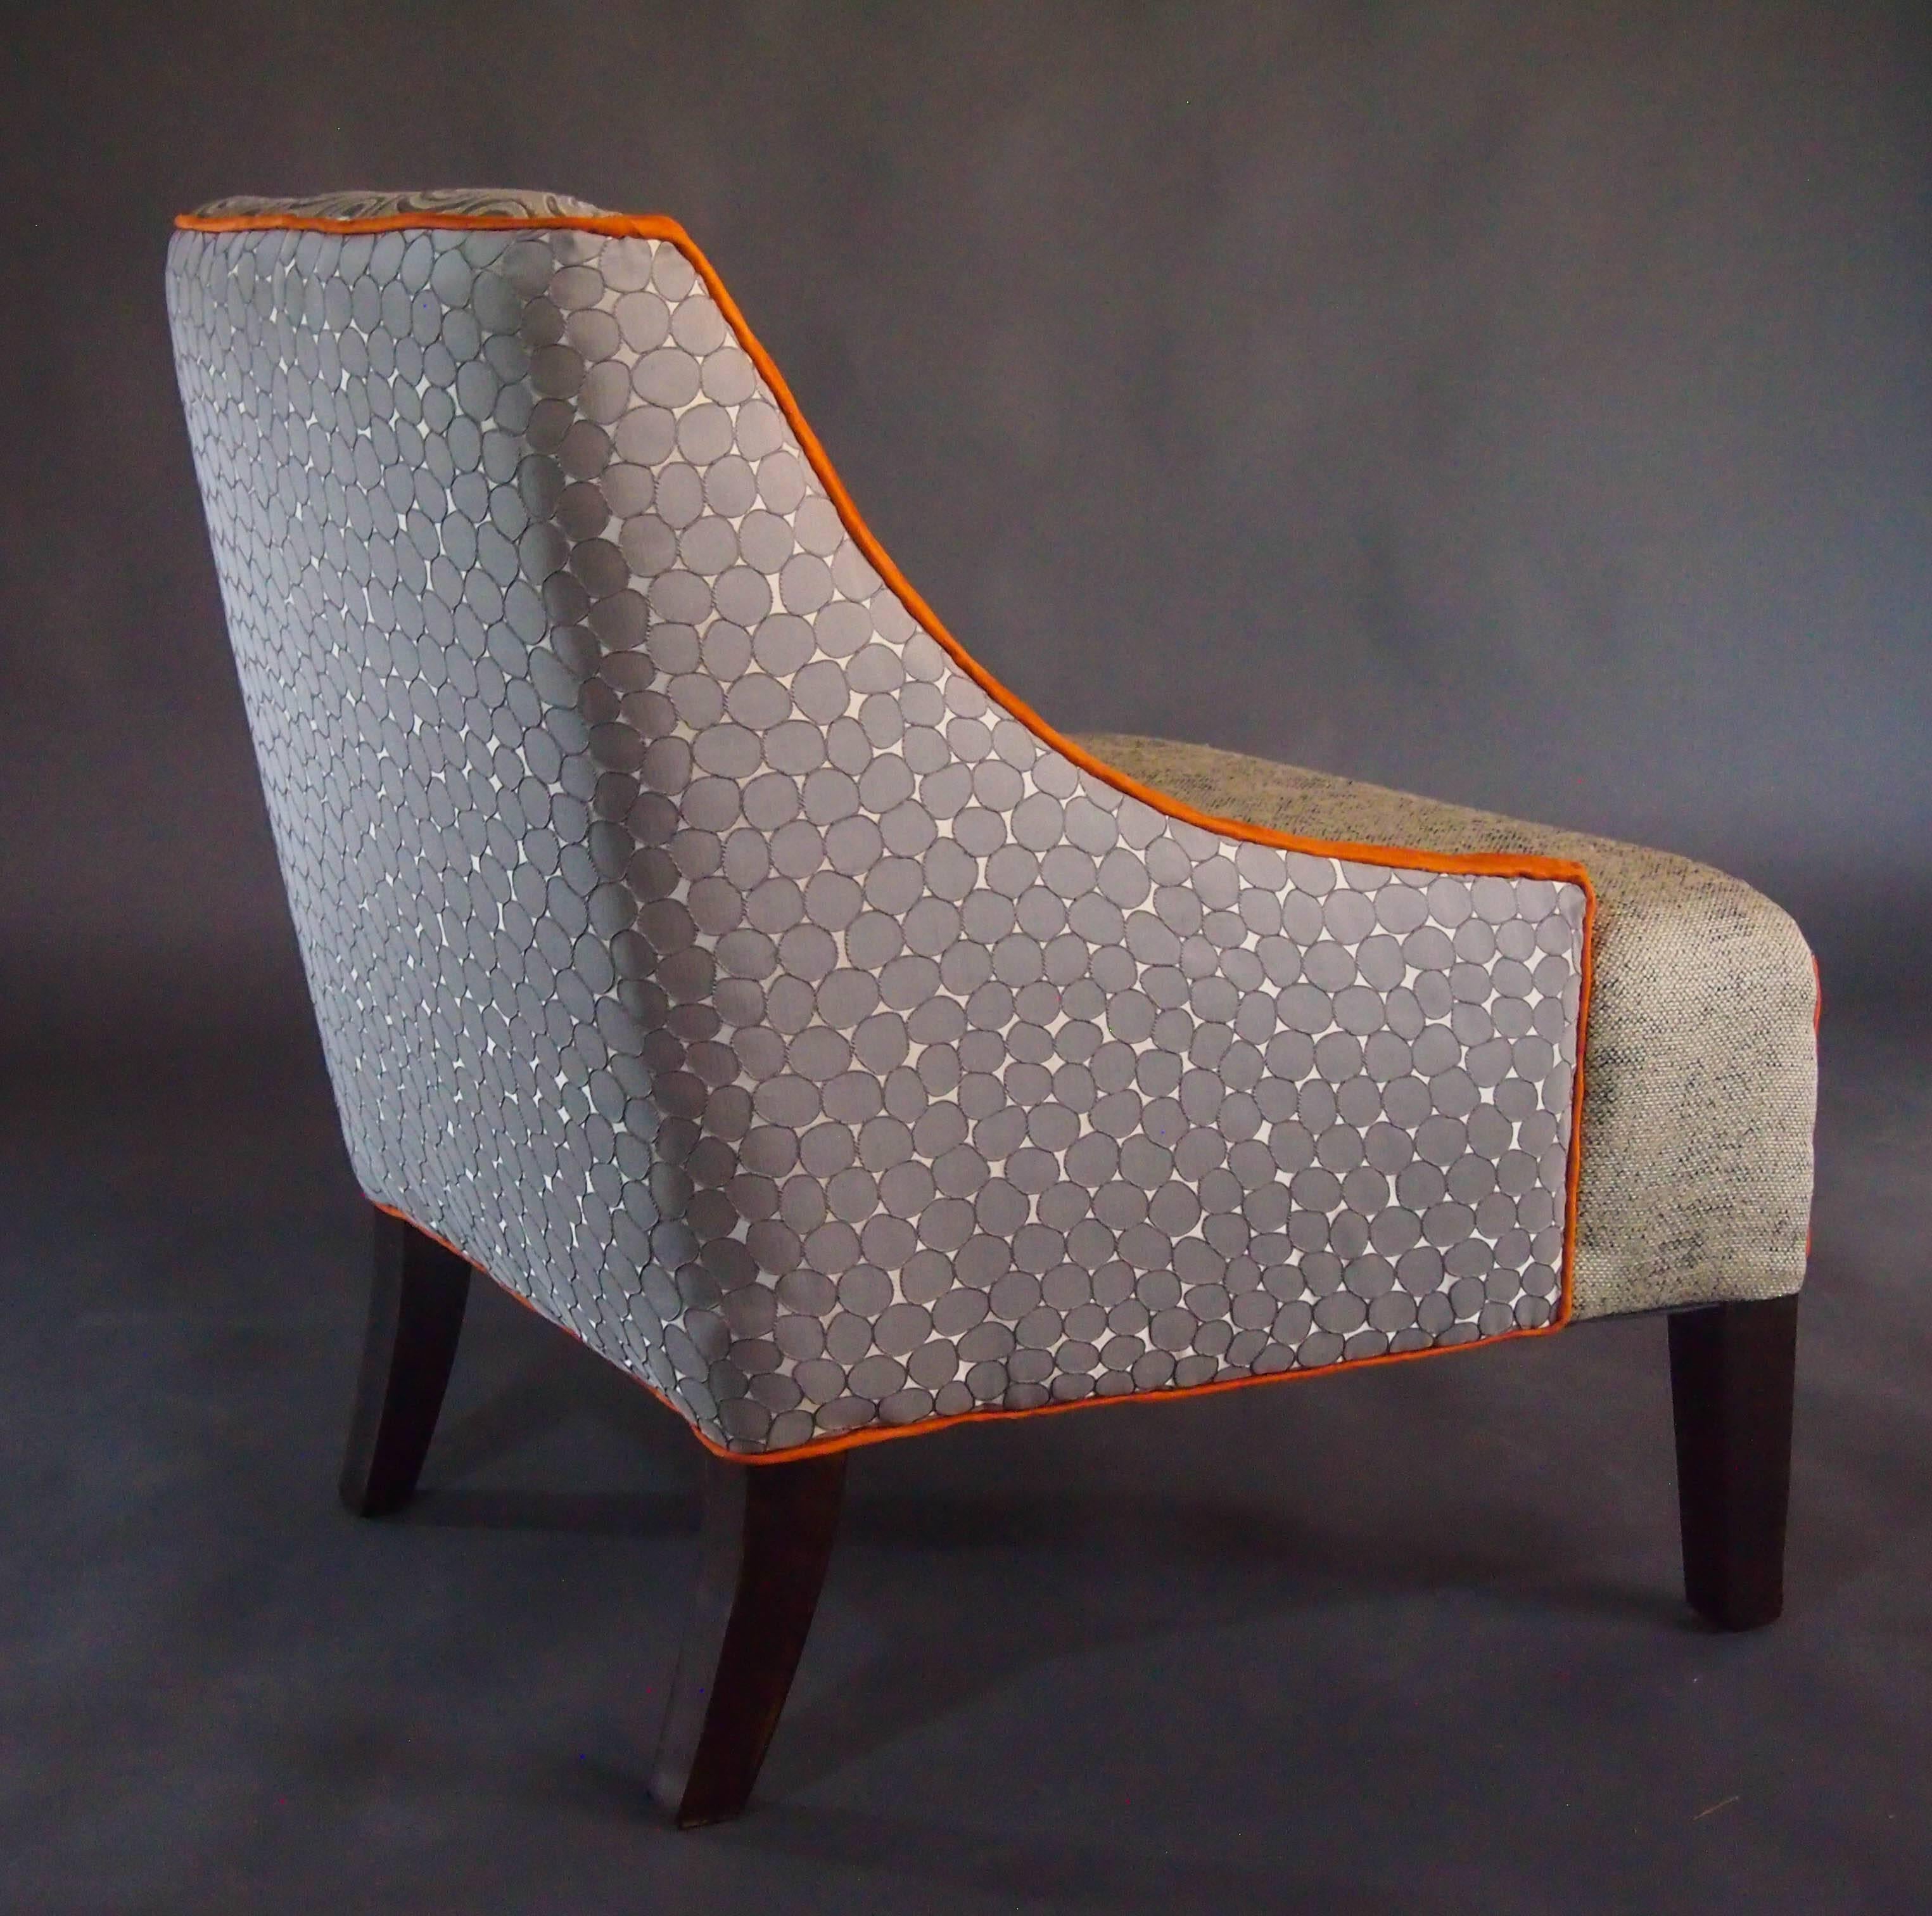 Thread Mid-Century Lounge Chair, Hollywood Regency Style in Tan, White, Orange-in stock For Sale